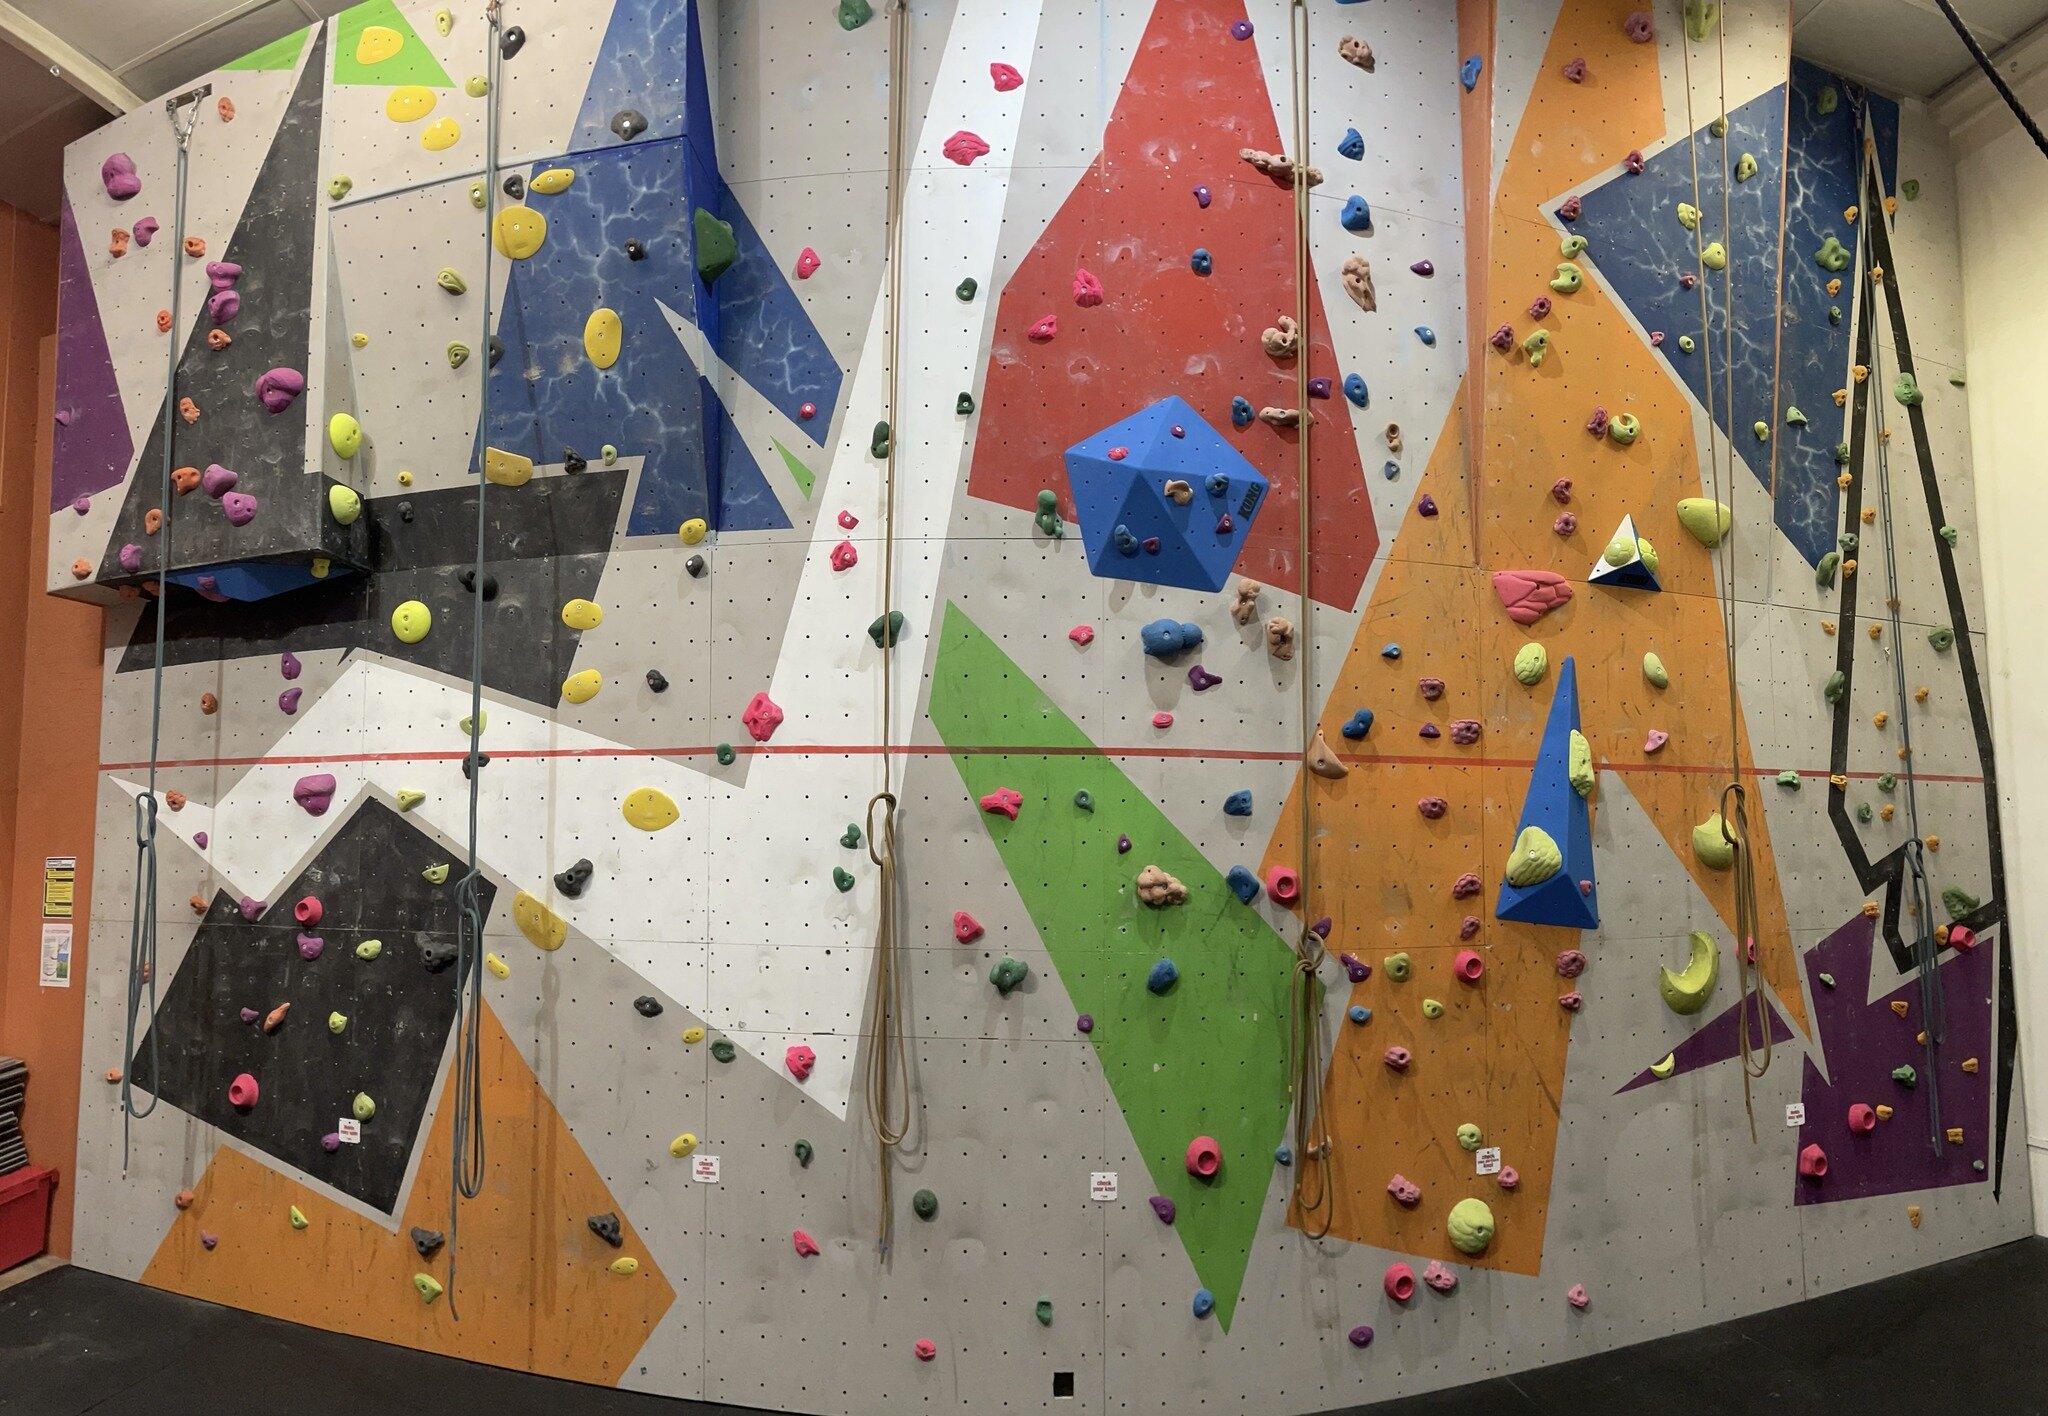 From Monday 22 May, we will be opening the centre every Monday evening (6-10pm) for competent climbers to use our facility. 

Note, this is not a coached session so you must be a competent climber (and bring a belay buddy), or be supervised by a comp